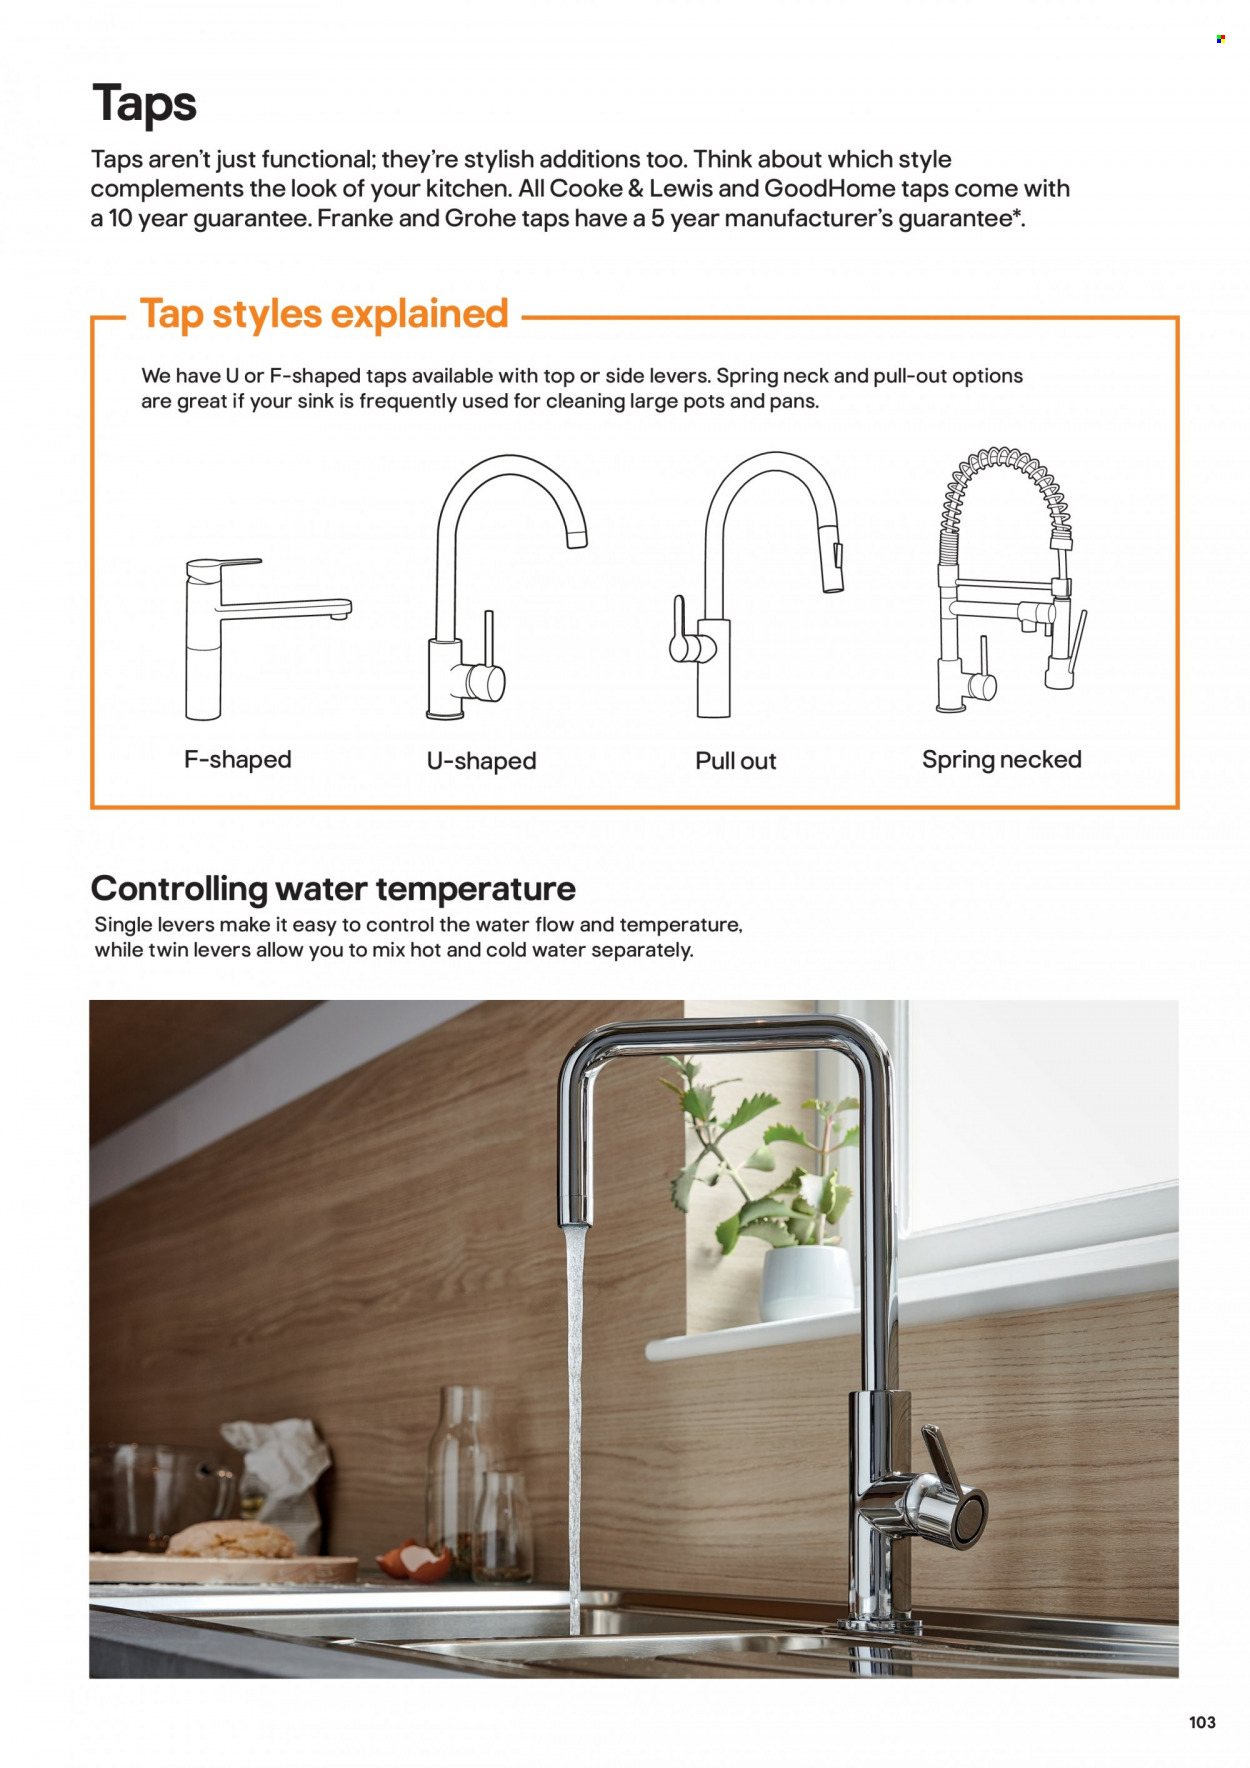 B&Q offer  - Sales products - sink, Grohe. Page 103.